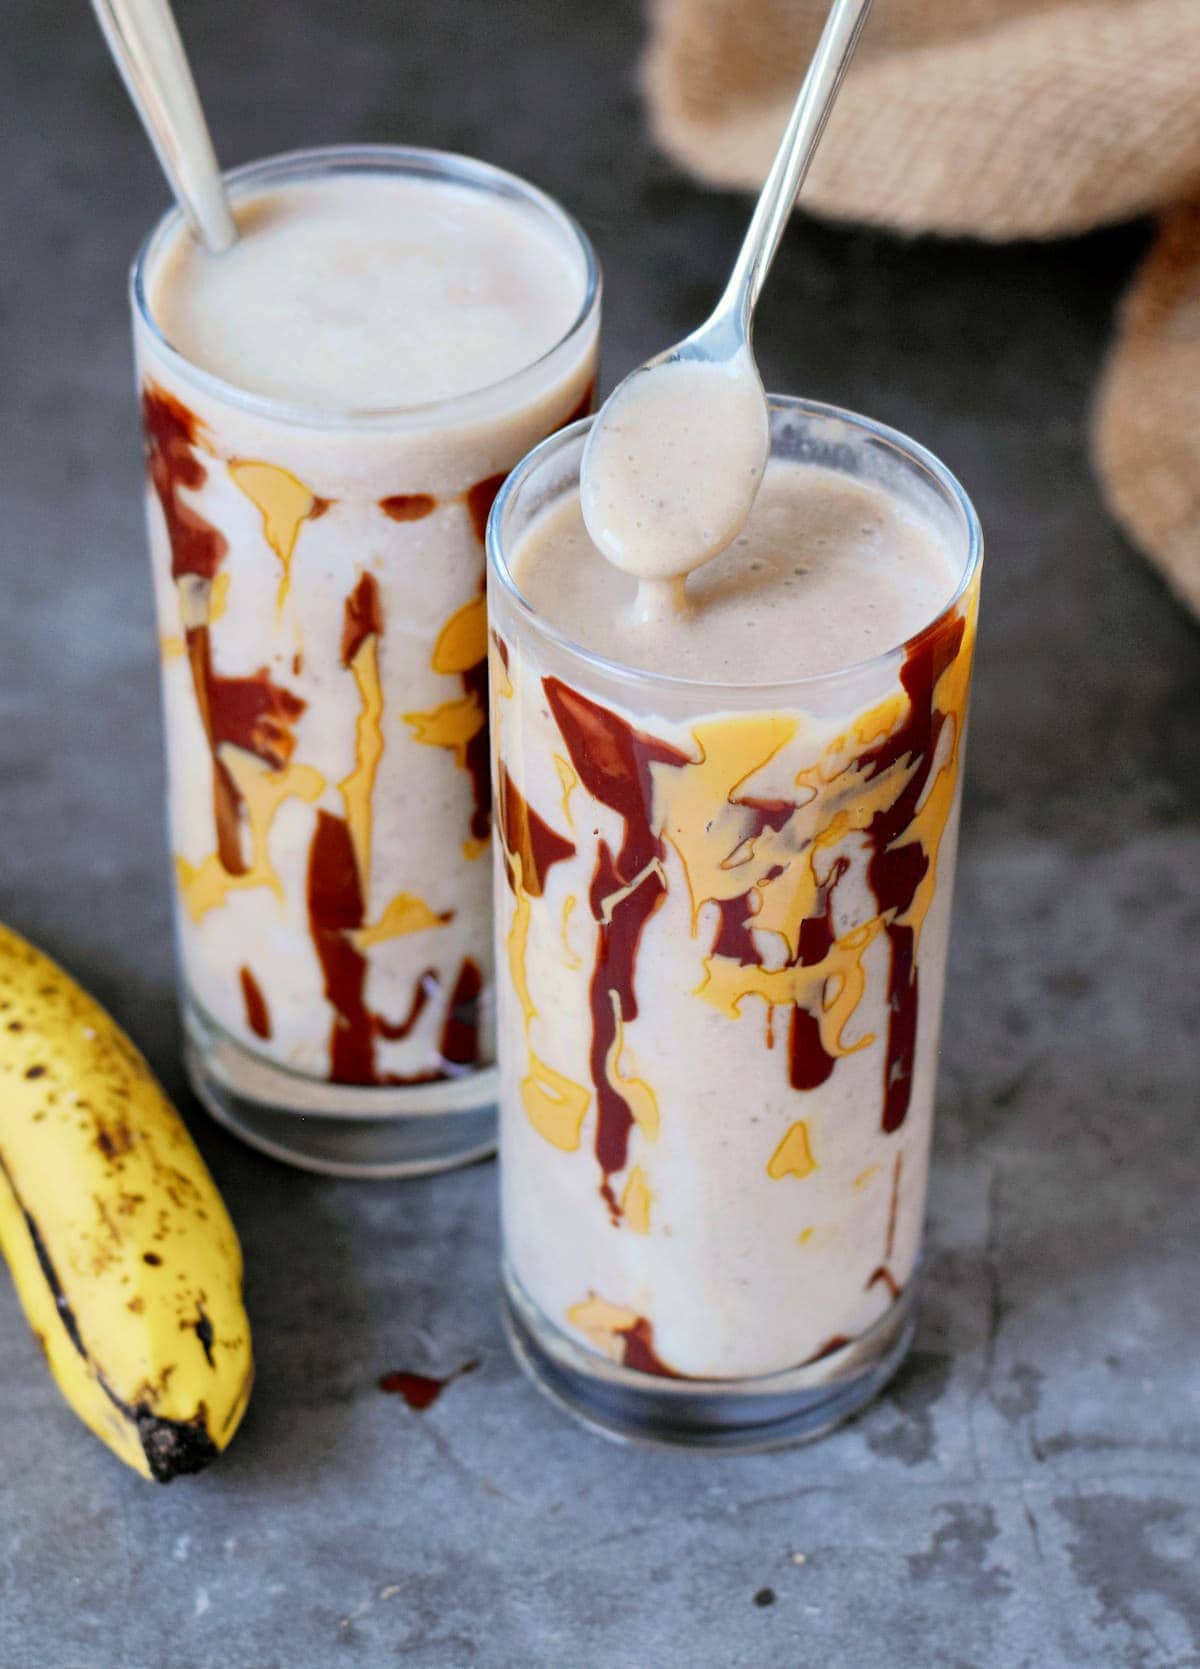 spoon over a glass filled with a creamy vegan shake drizzled with PB and chocolate